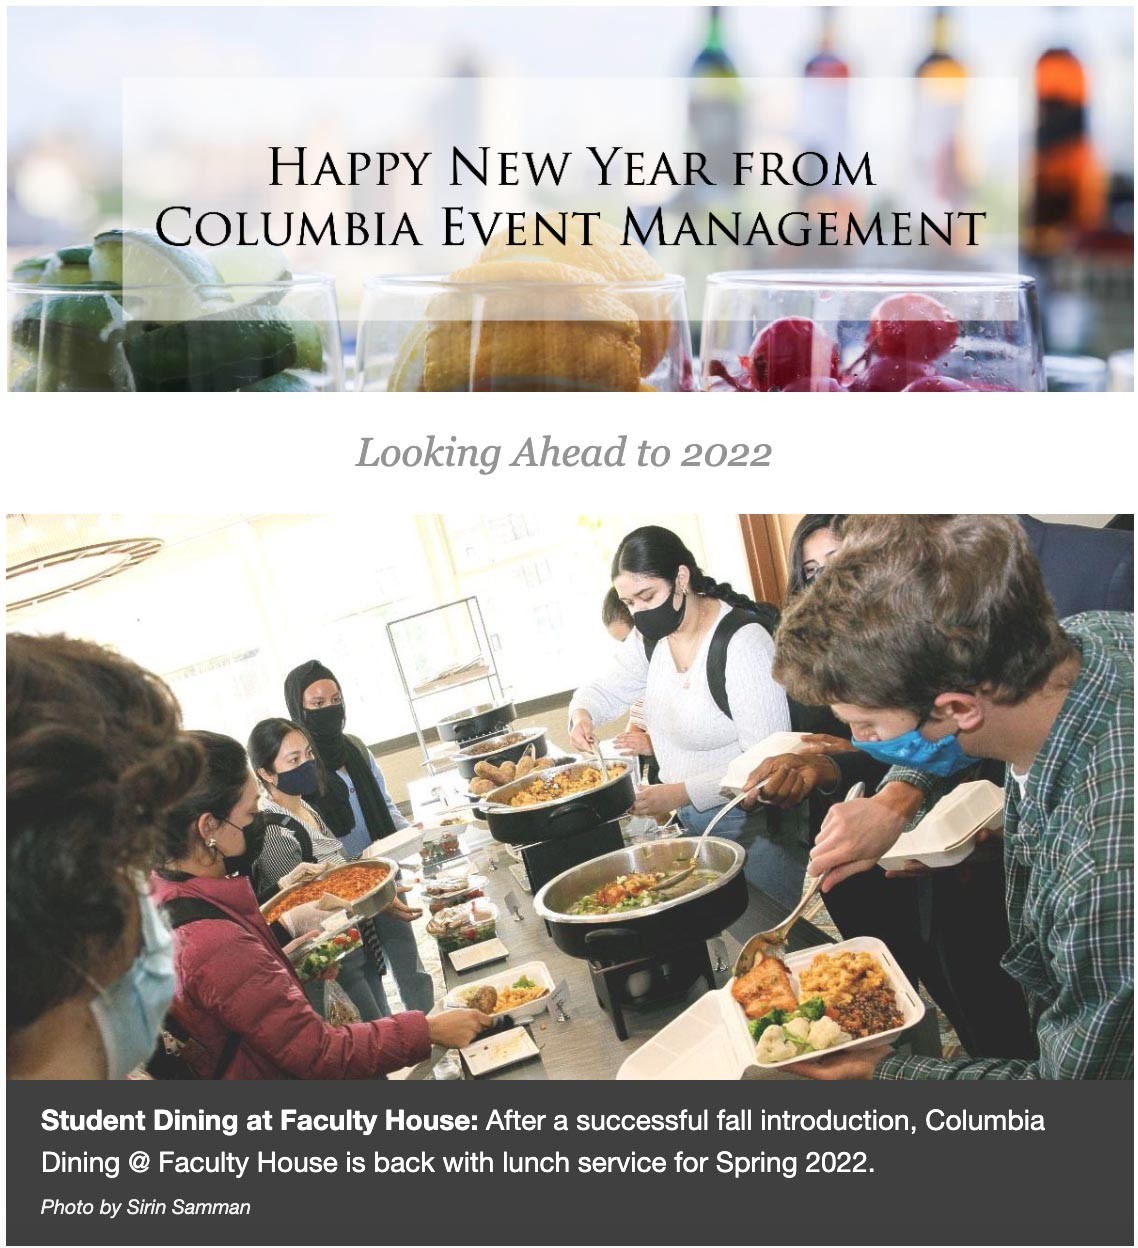 Happy new year from Columbia Event Management